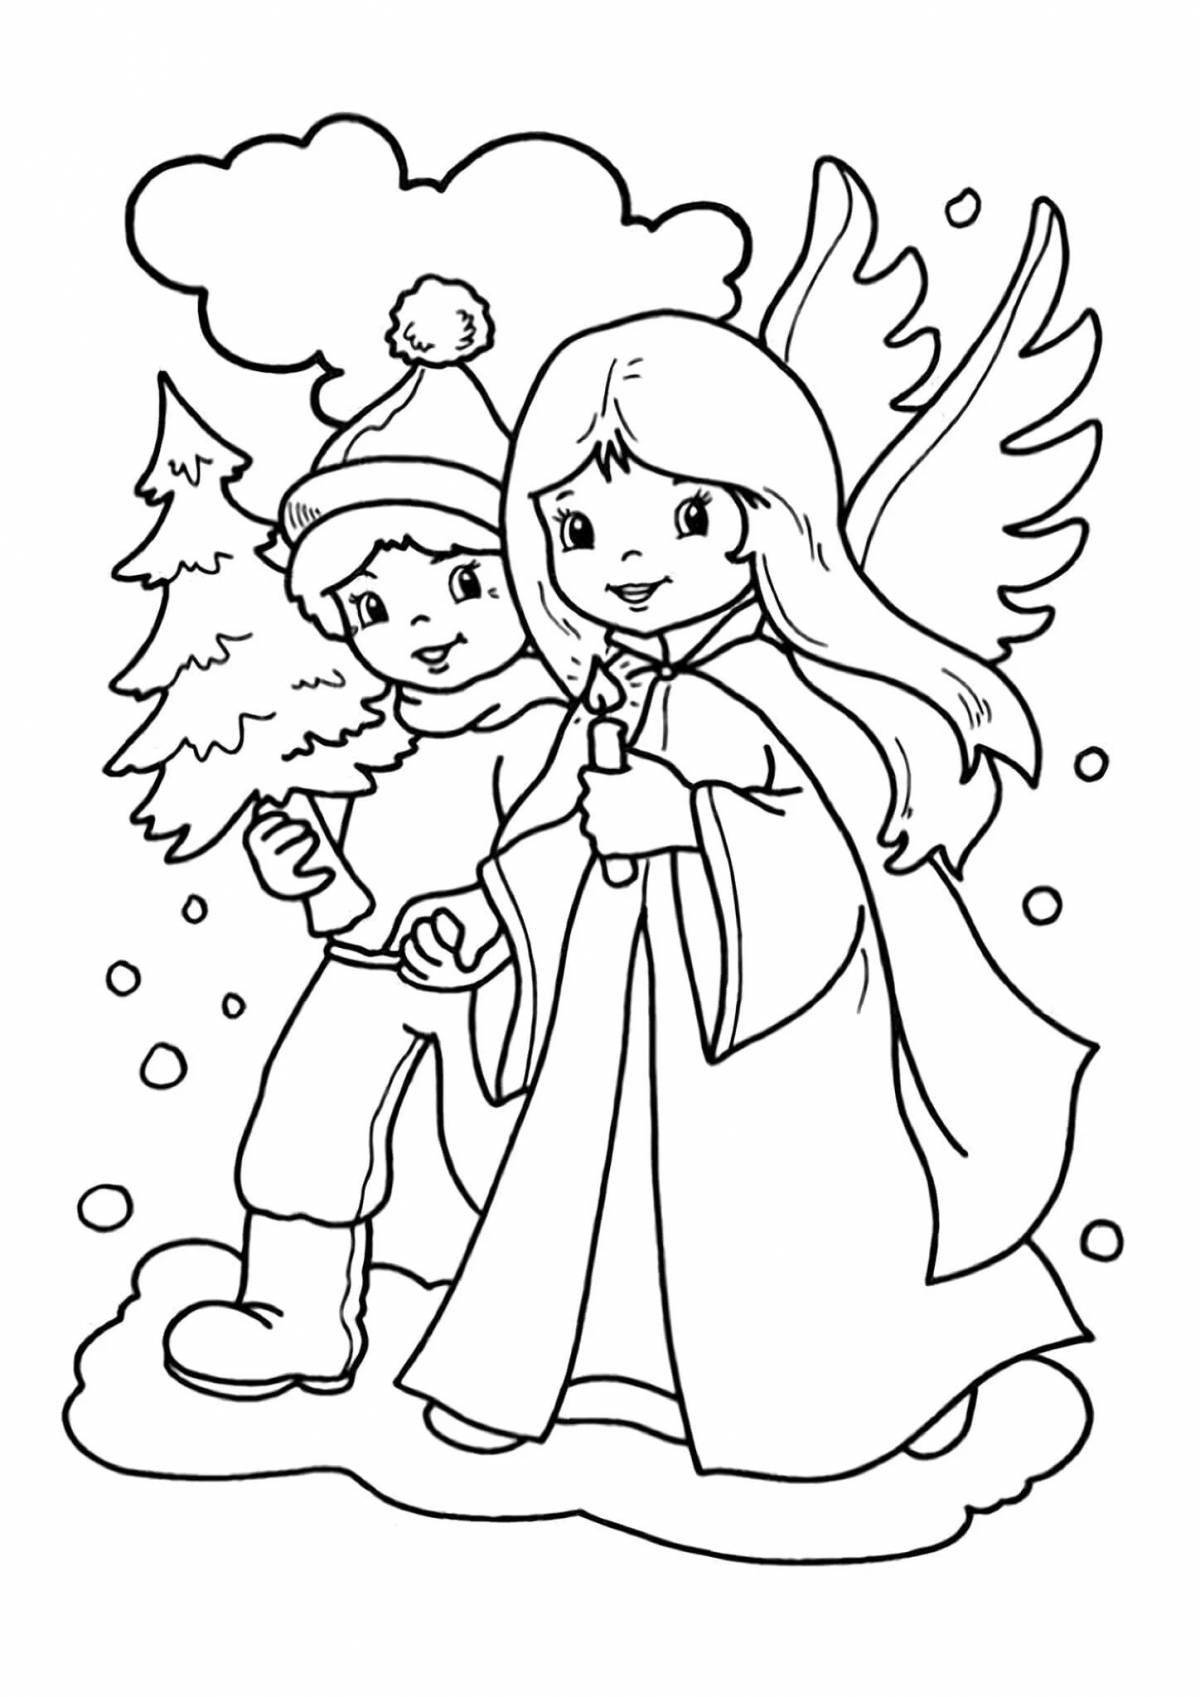 Luminous Christmas coloring book for 3-4 year olds